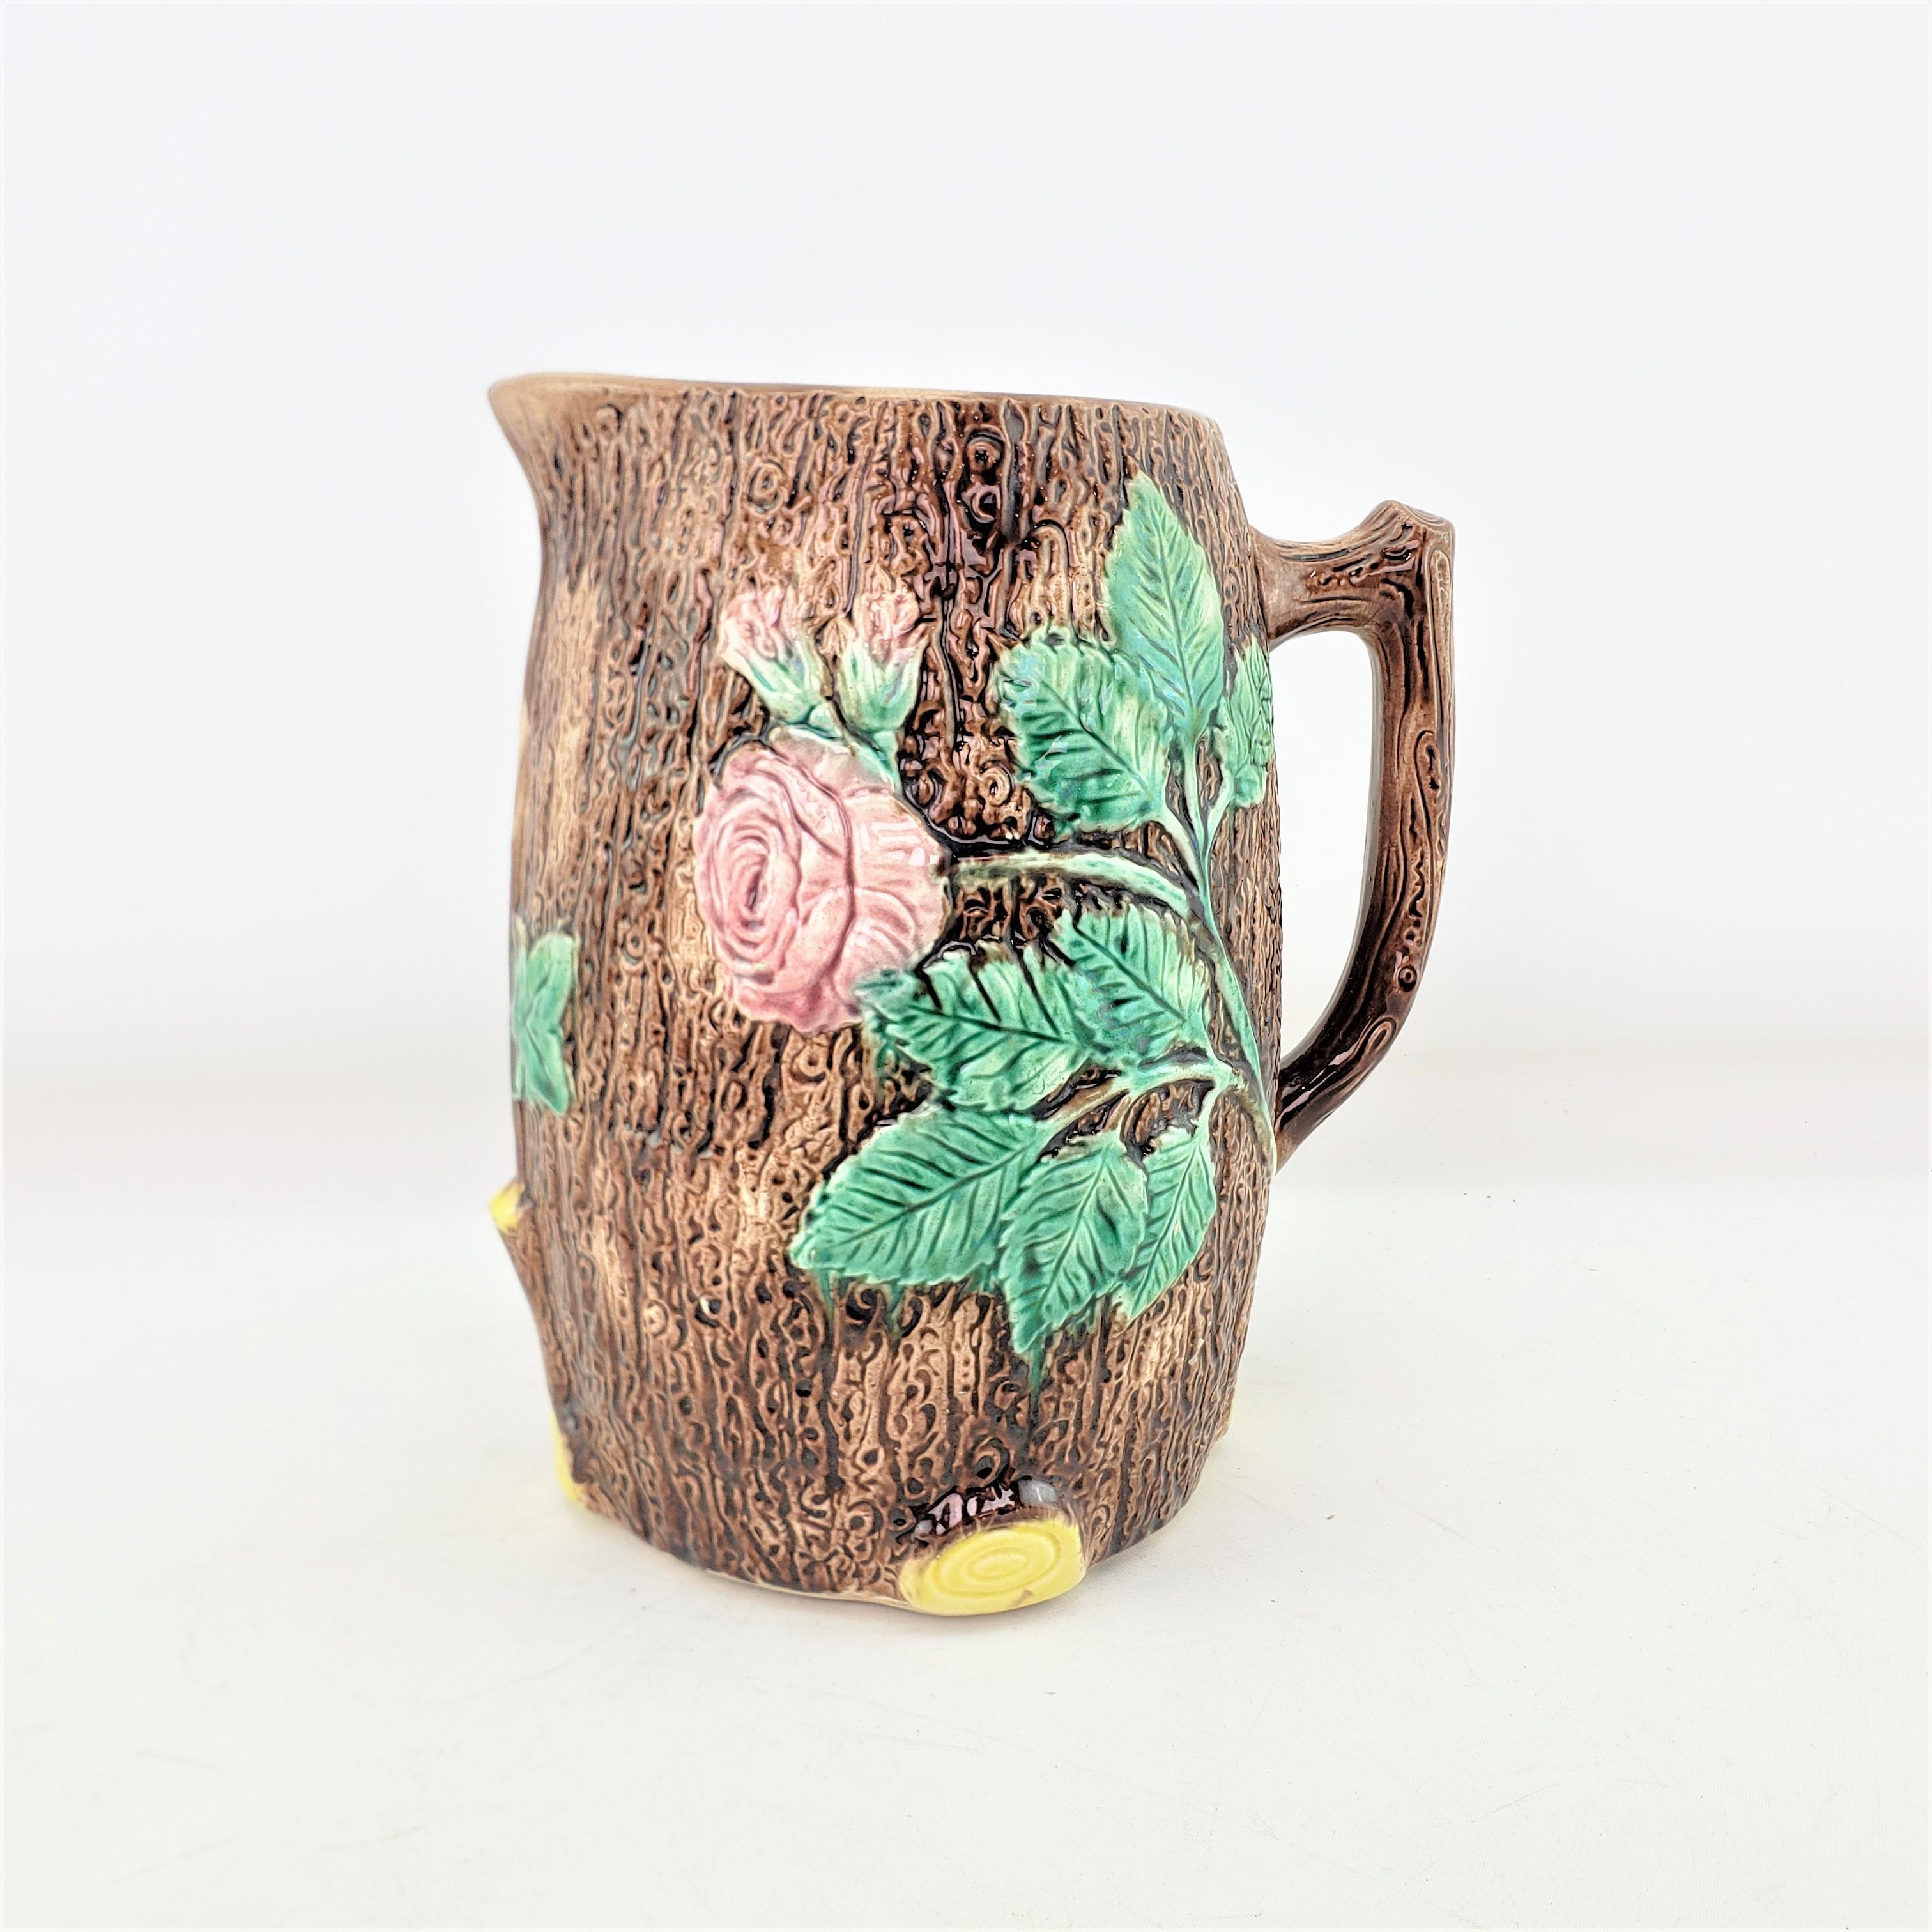 This large antique pitcher is unsigned, but presumed to have originated from England and date to approximately 1920 and done in a Victorian style. The pitcher is composed of majolica and decorated with a wood grain background with raised leaves and